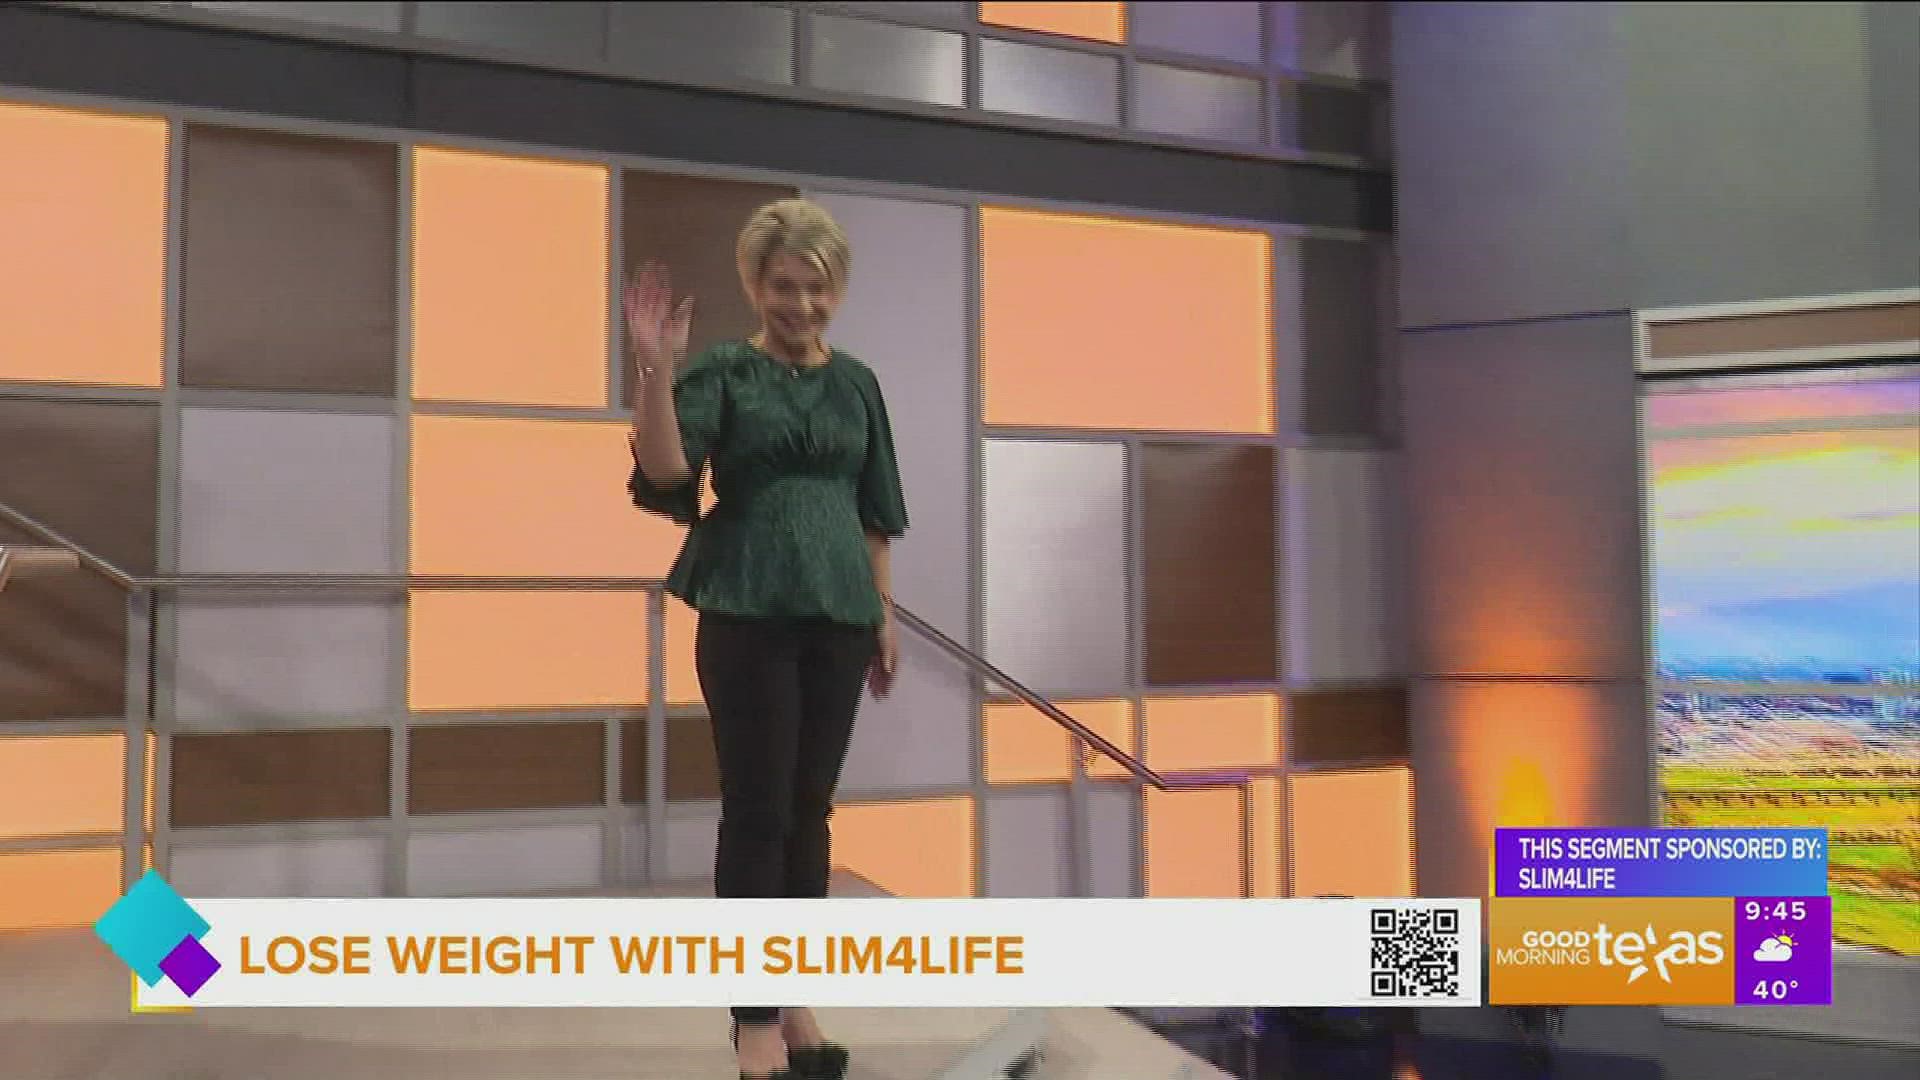 Find out how SLIM4Life can help you be slim for life. This segment is sponsored by SLIM4Life. Call 833.SLIMTODAY or go to slim4life.com for more information.